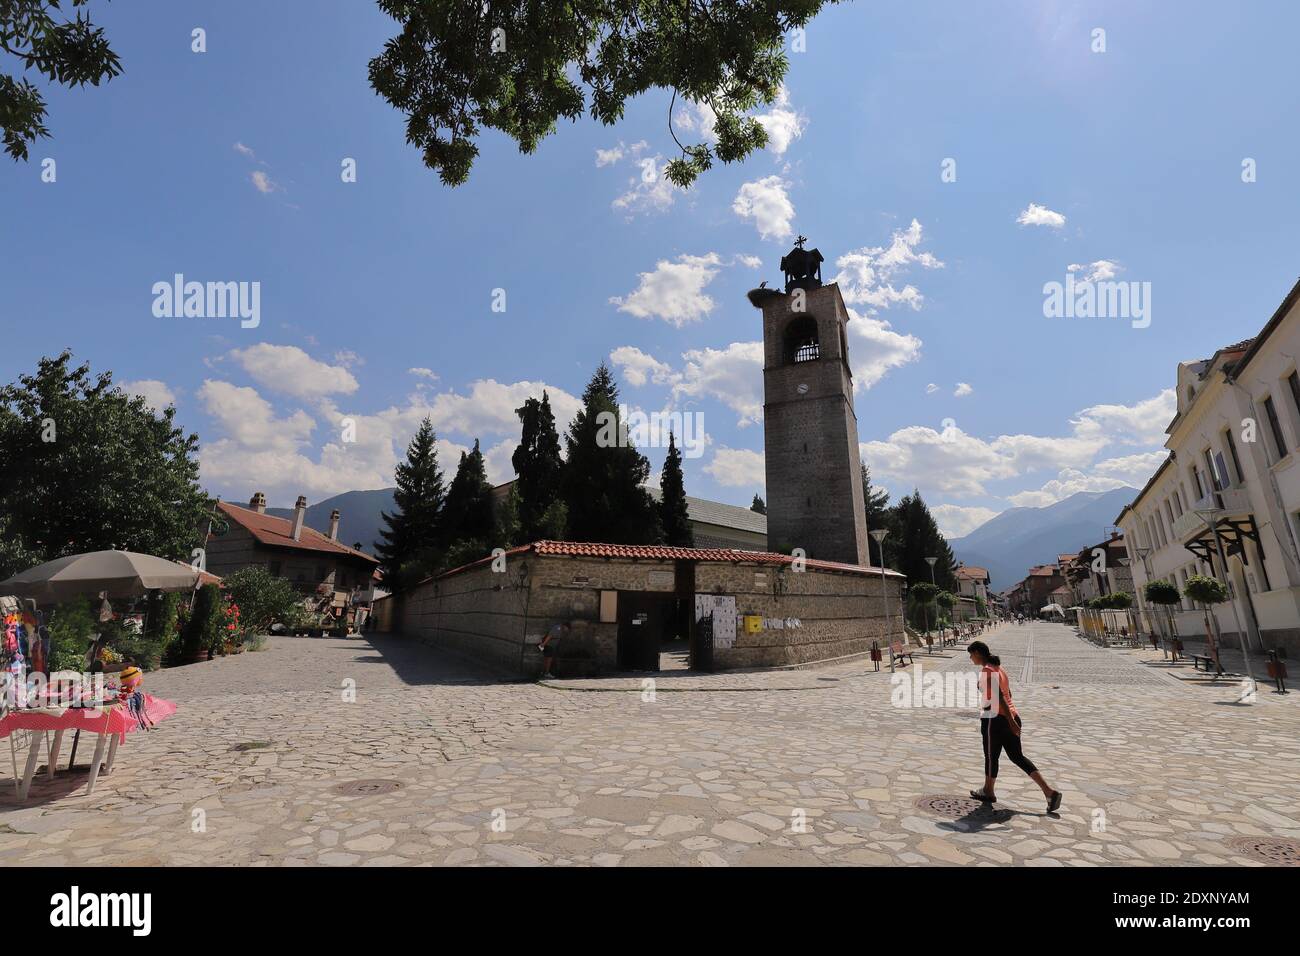 BULGARIA, BANSKO  - AUGUST 02, 2019: Holy Trinity Church with Pirin Mountains in the background Stock Photo